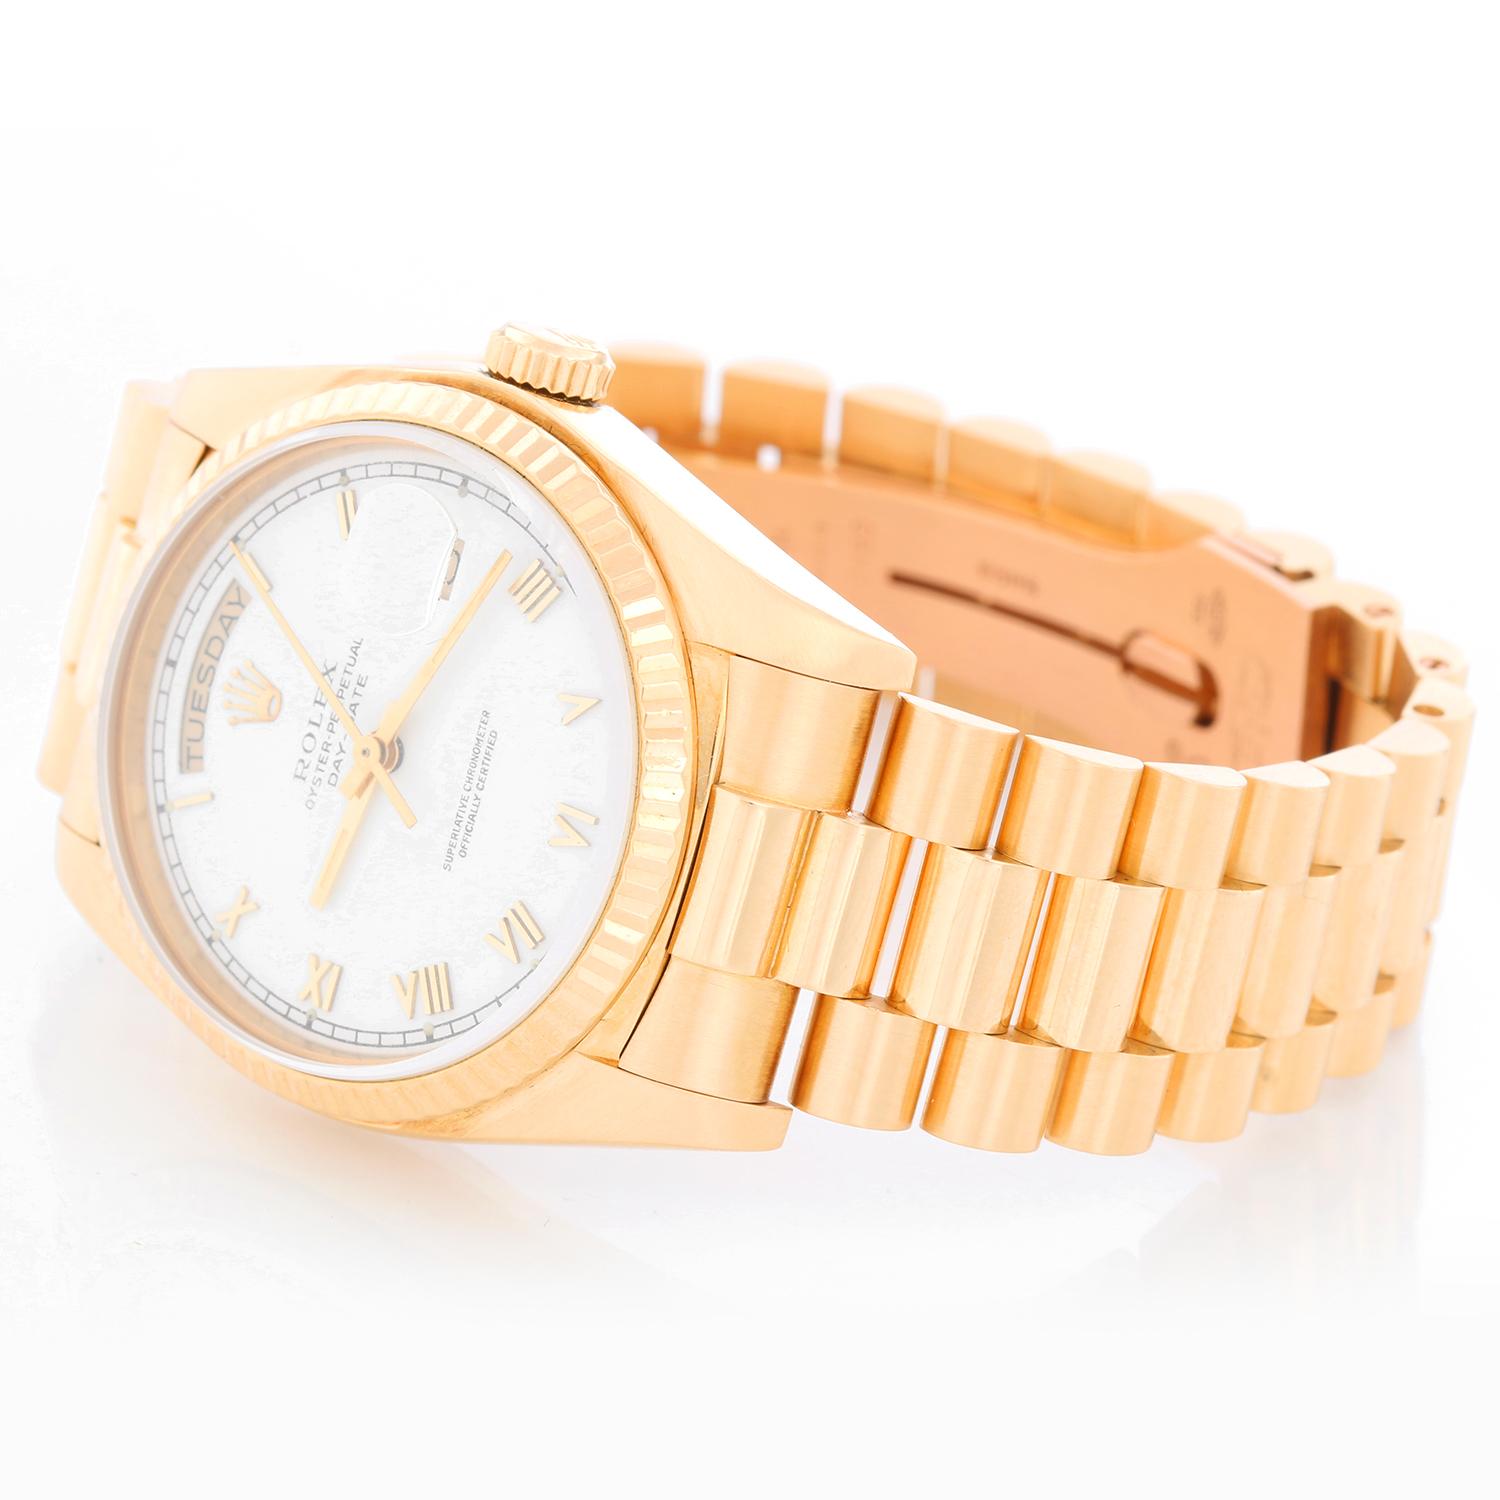 Rolex President Day-Date Men's' 18k Yellow Gold Watch 18038 - Automatic winding, 27 jewels, Quickset date, sapphire crystal. 18k yellow gold case with fluted bezel. White dial with skinny Roman numerals. 18k yellow gold President bracelet. Pre-owned